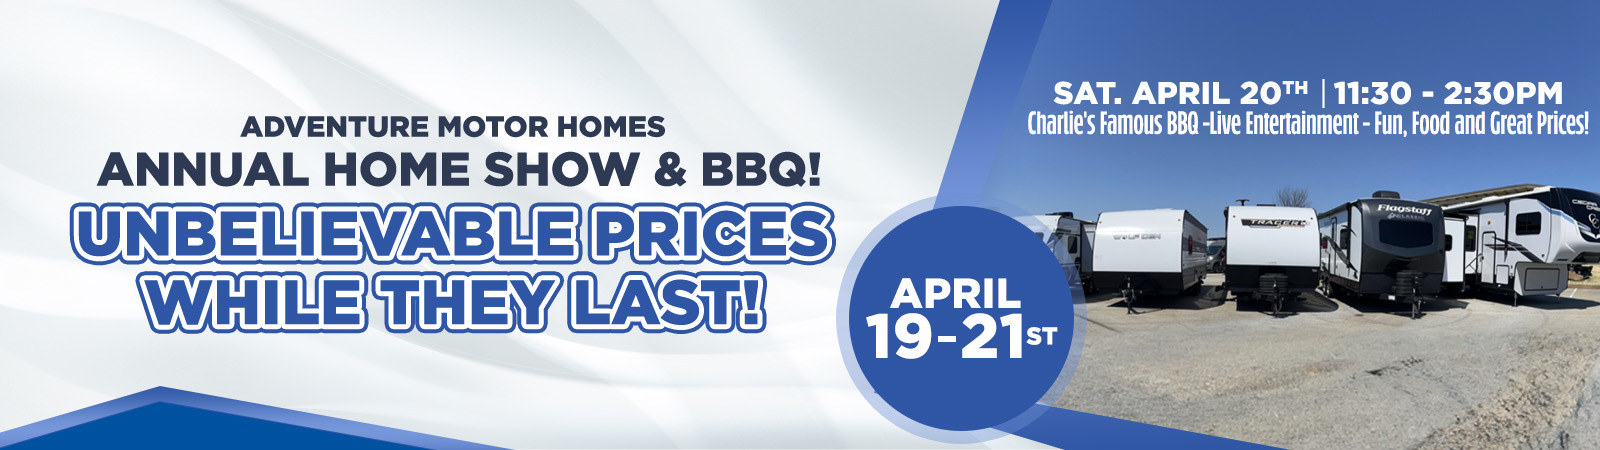 Home Show & BBQ